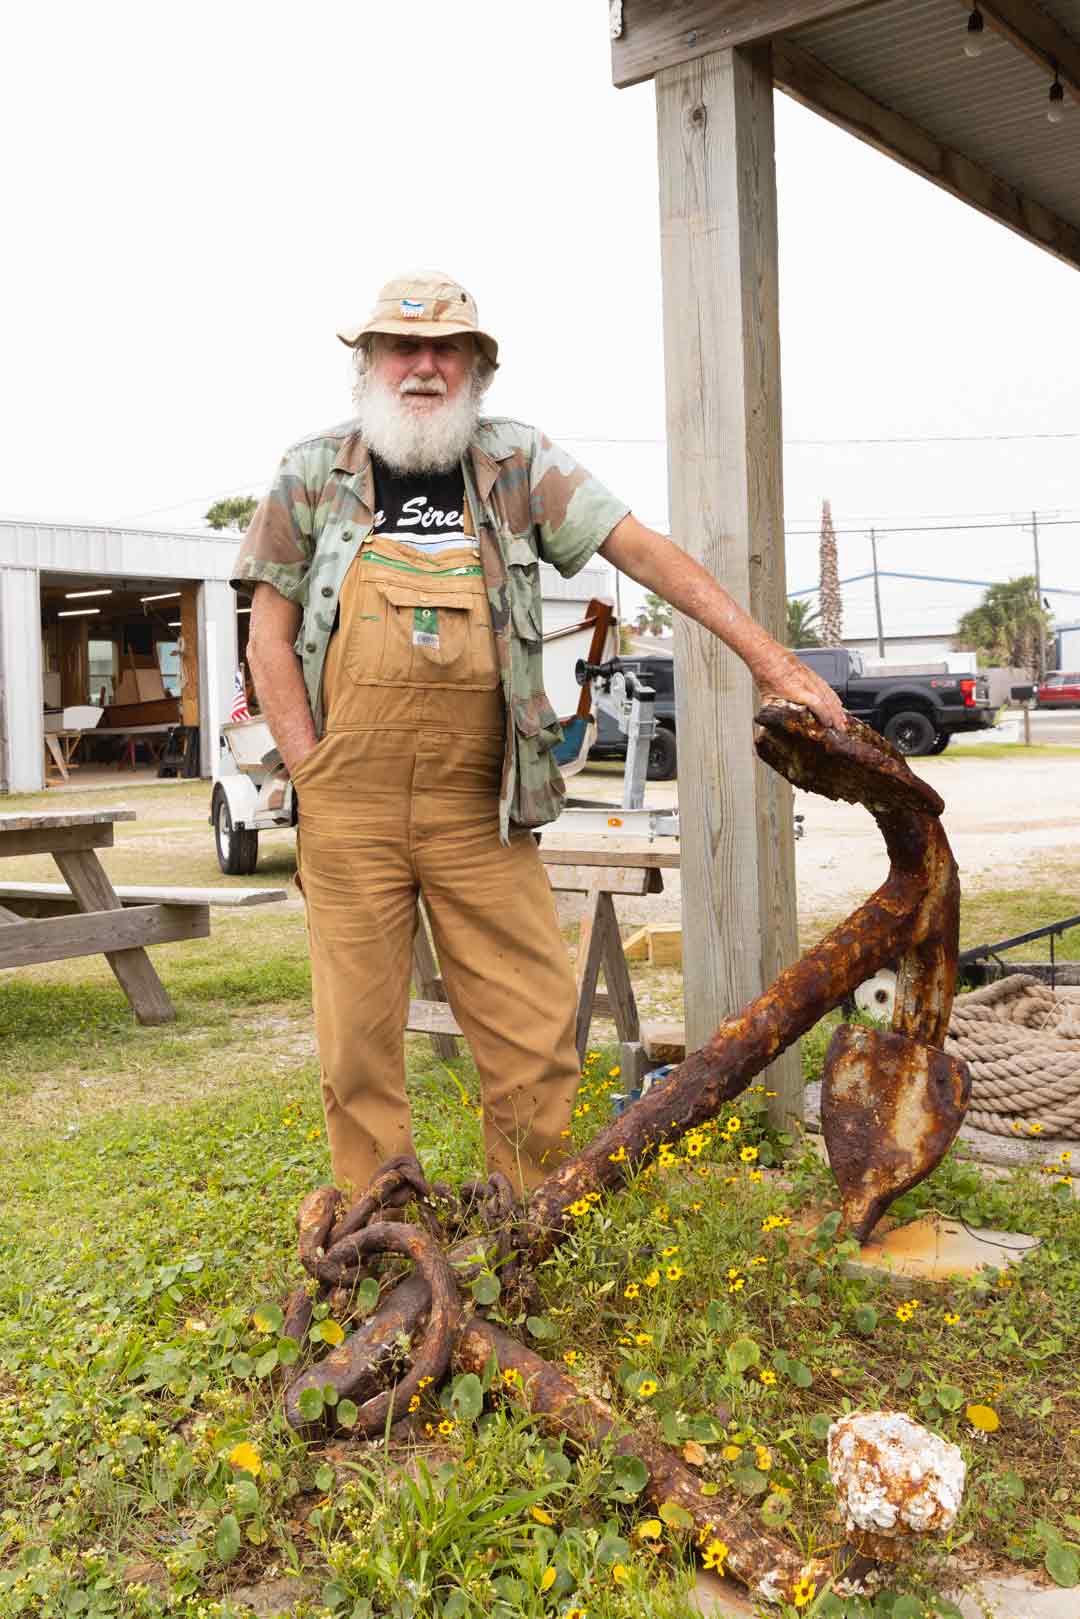 Charles Ferguson next to a rusted anchor